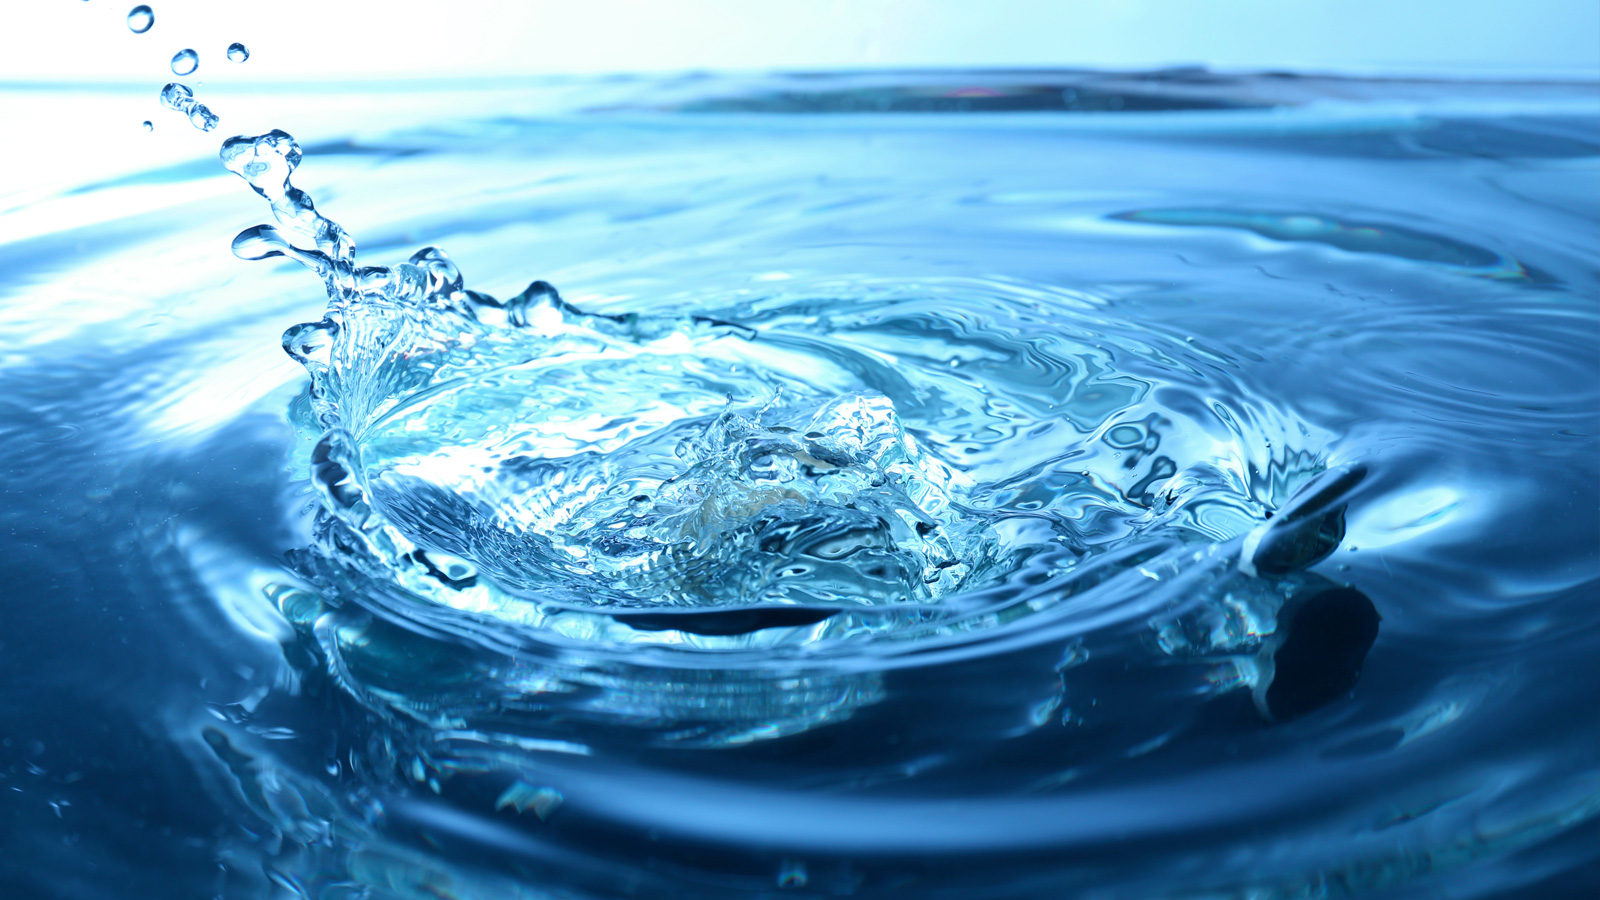 Argonne scientists and collaborators at the University of Chicago and Northwestern are rethinking the water cycle and seeking to make it more effective and efficient. (Image by Shutterstock / Africa Studio.)